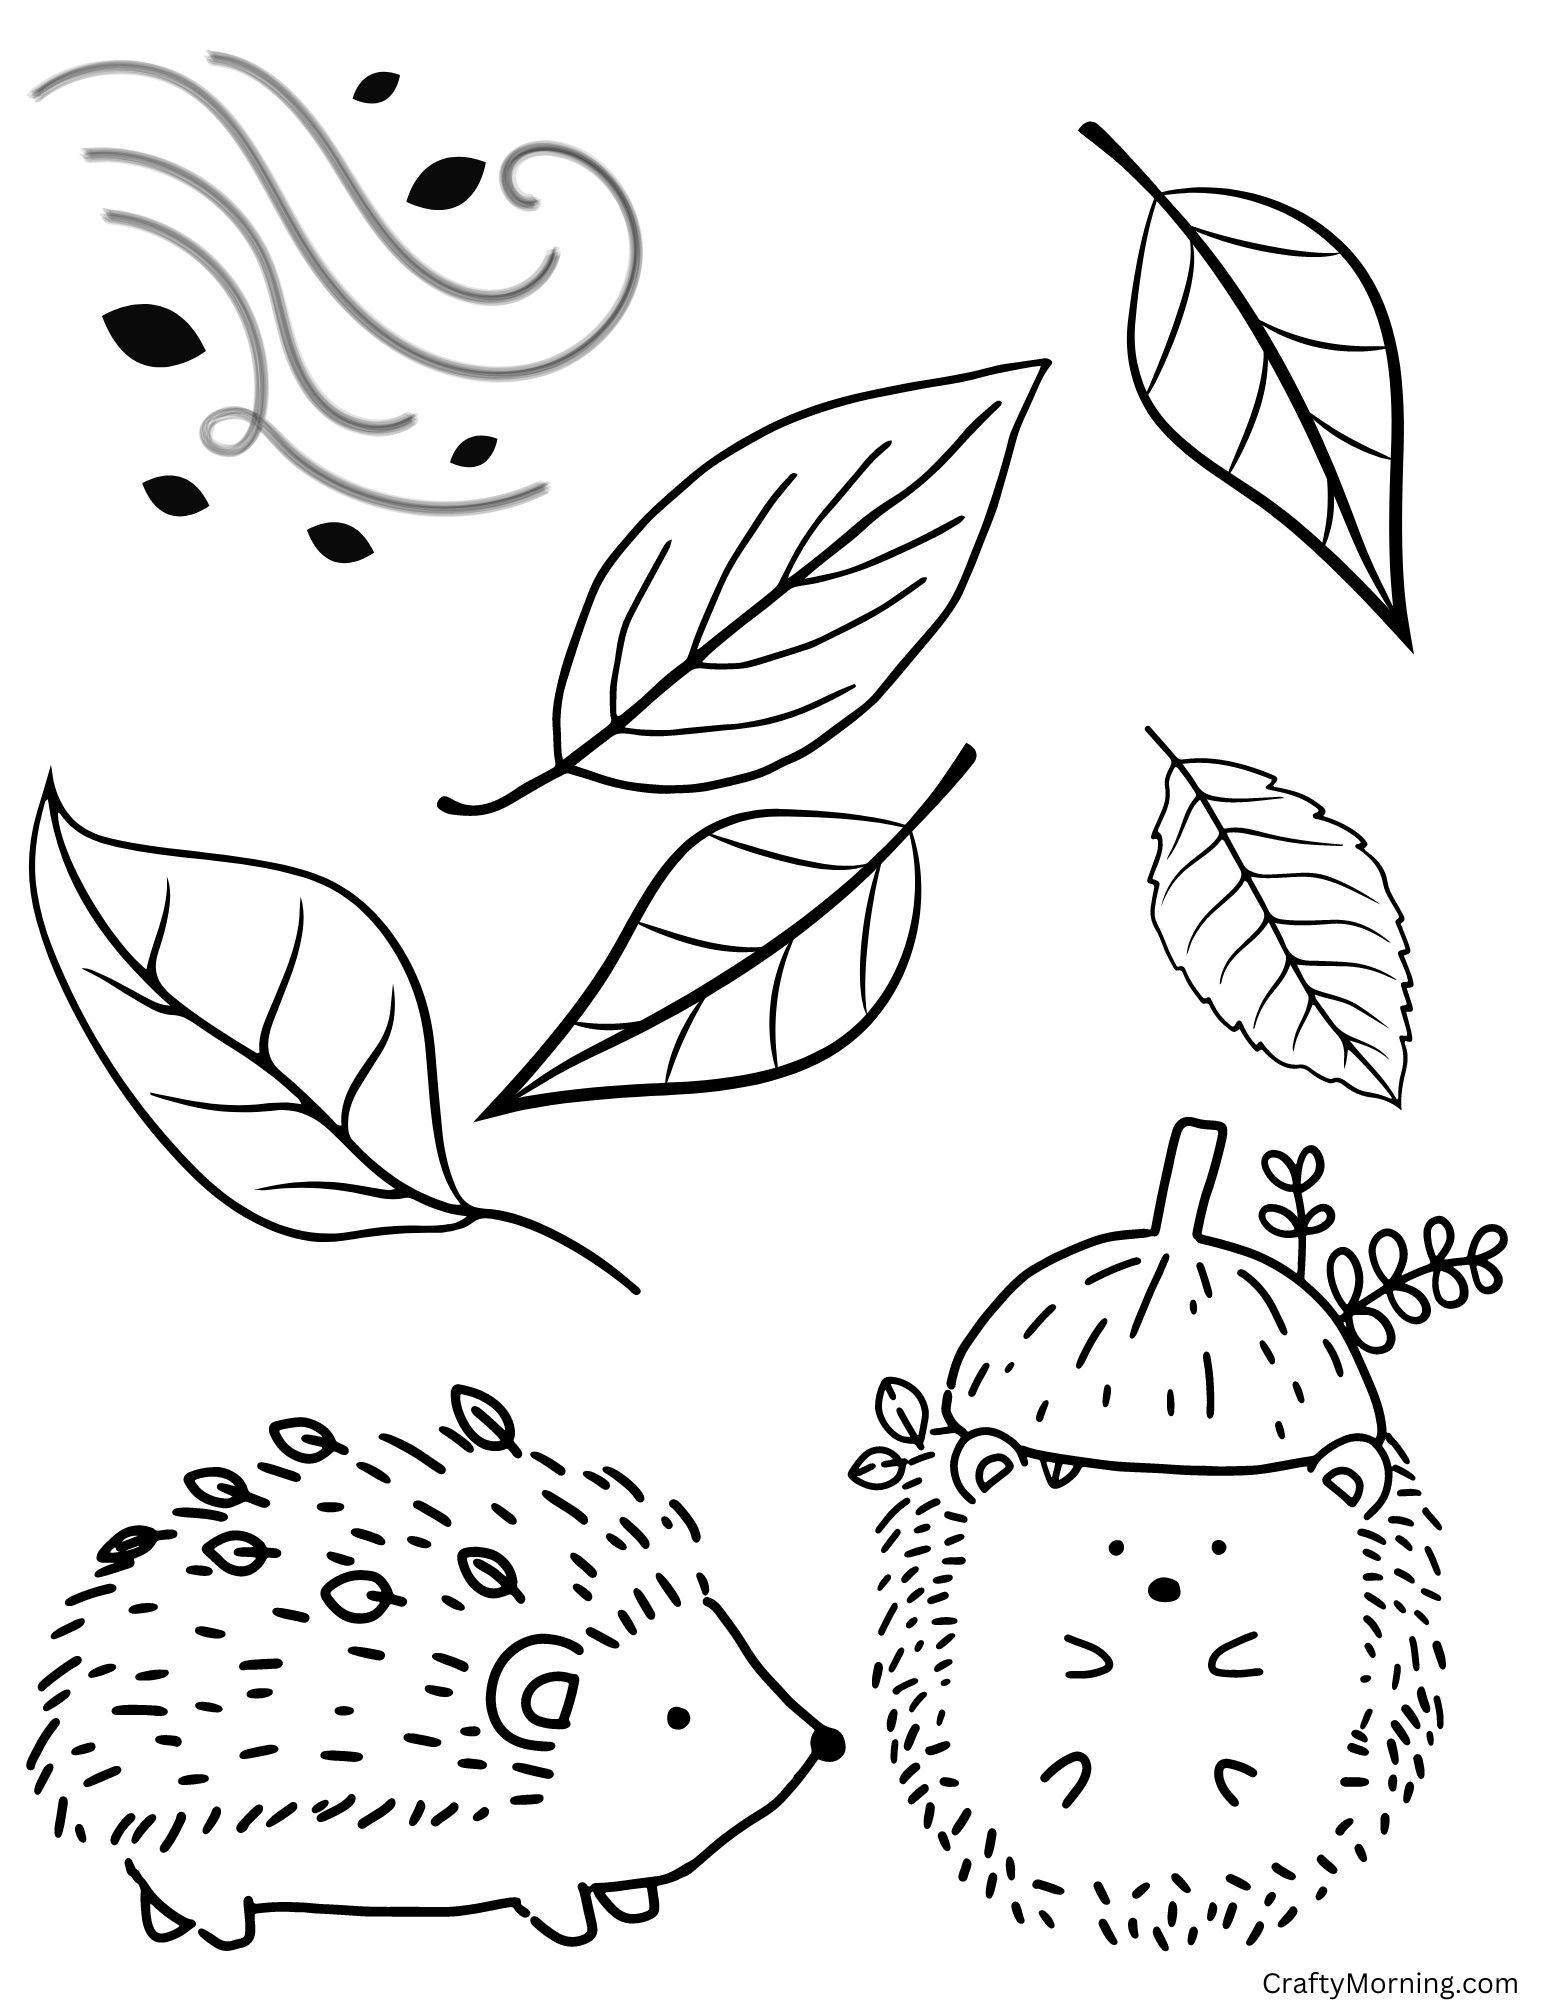 fall apple coloring page